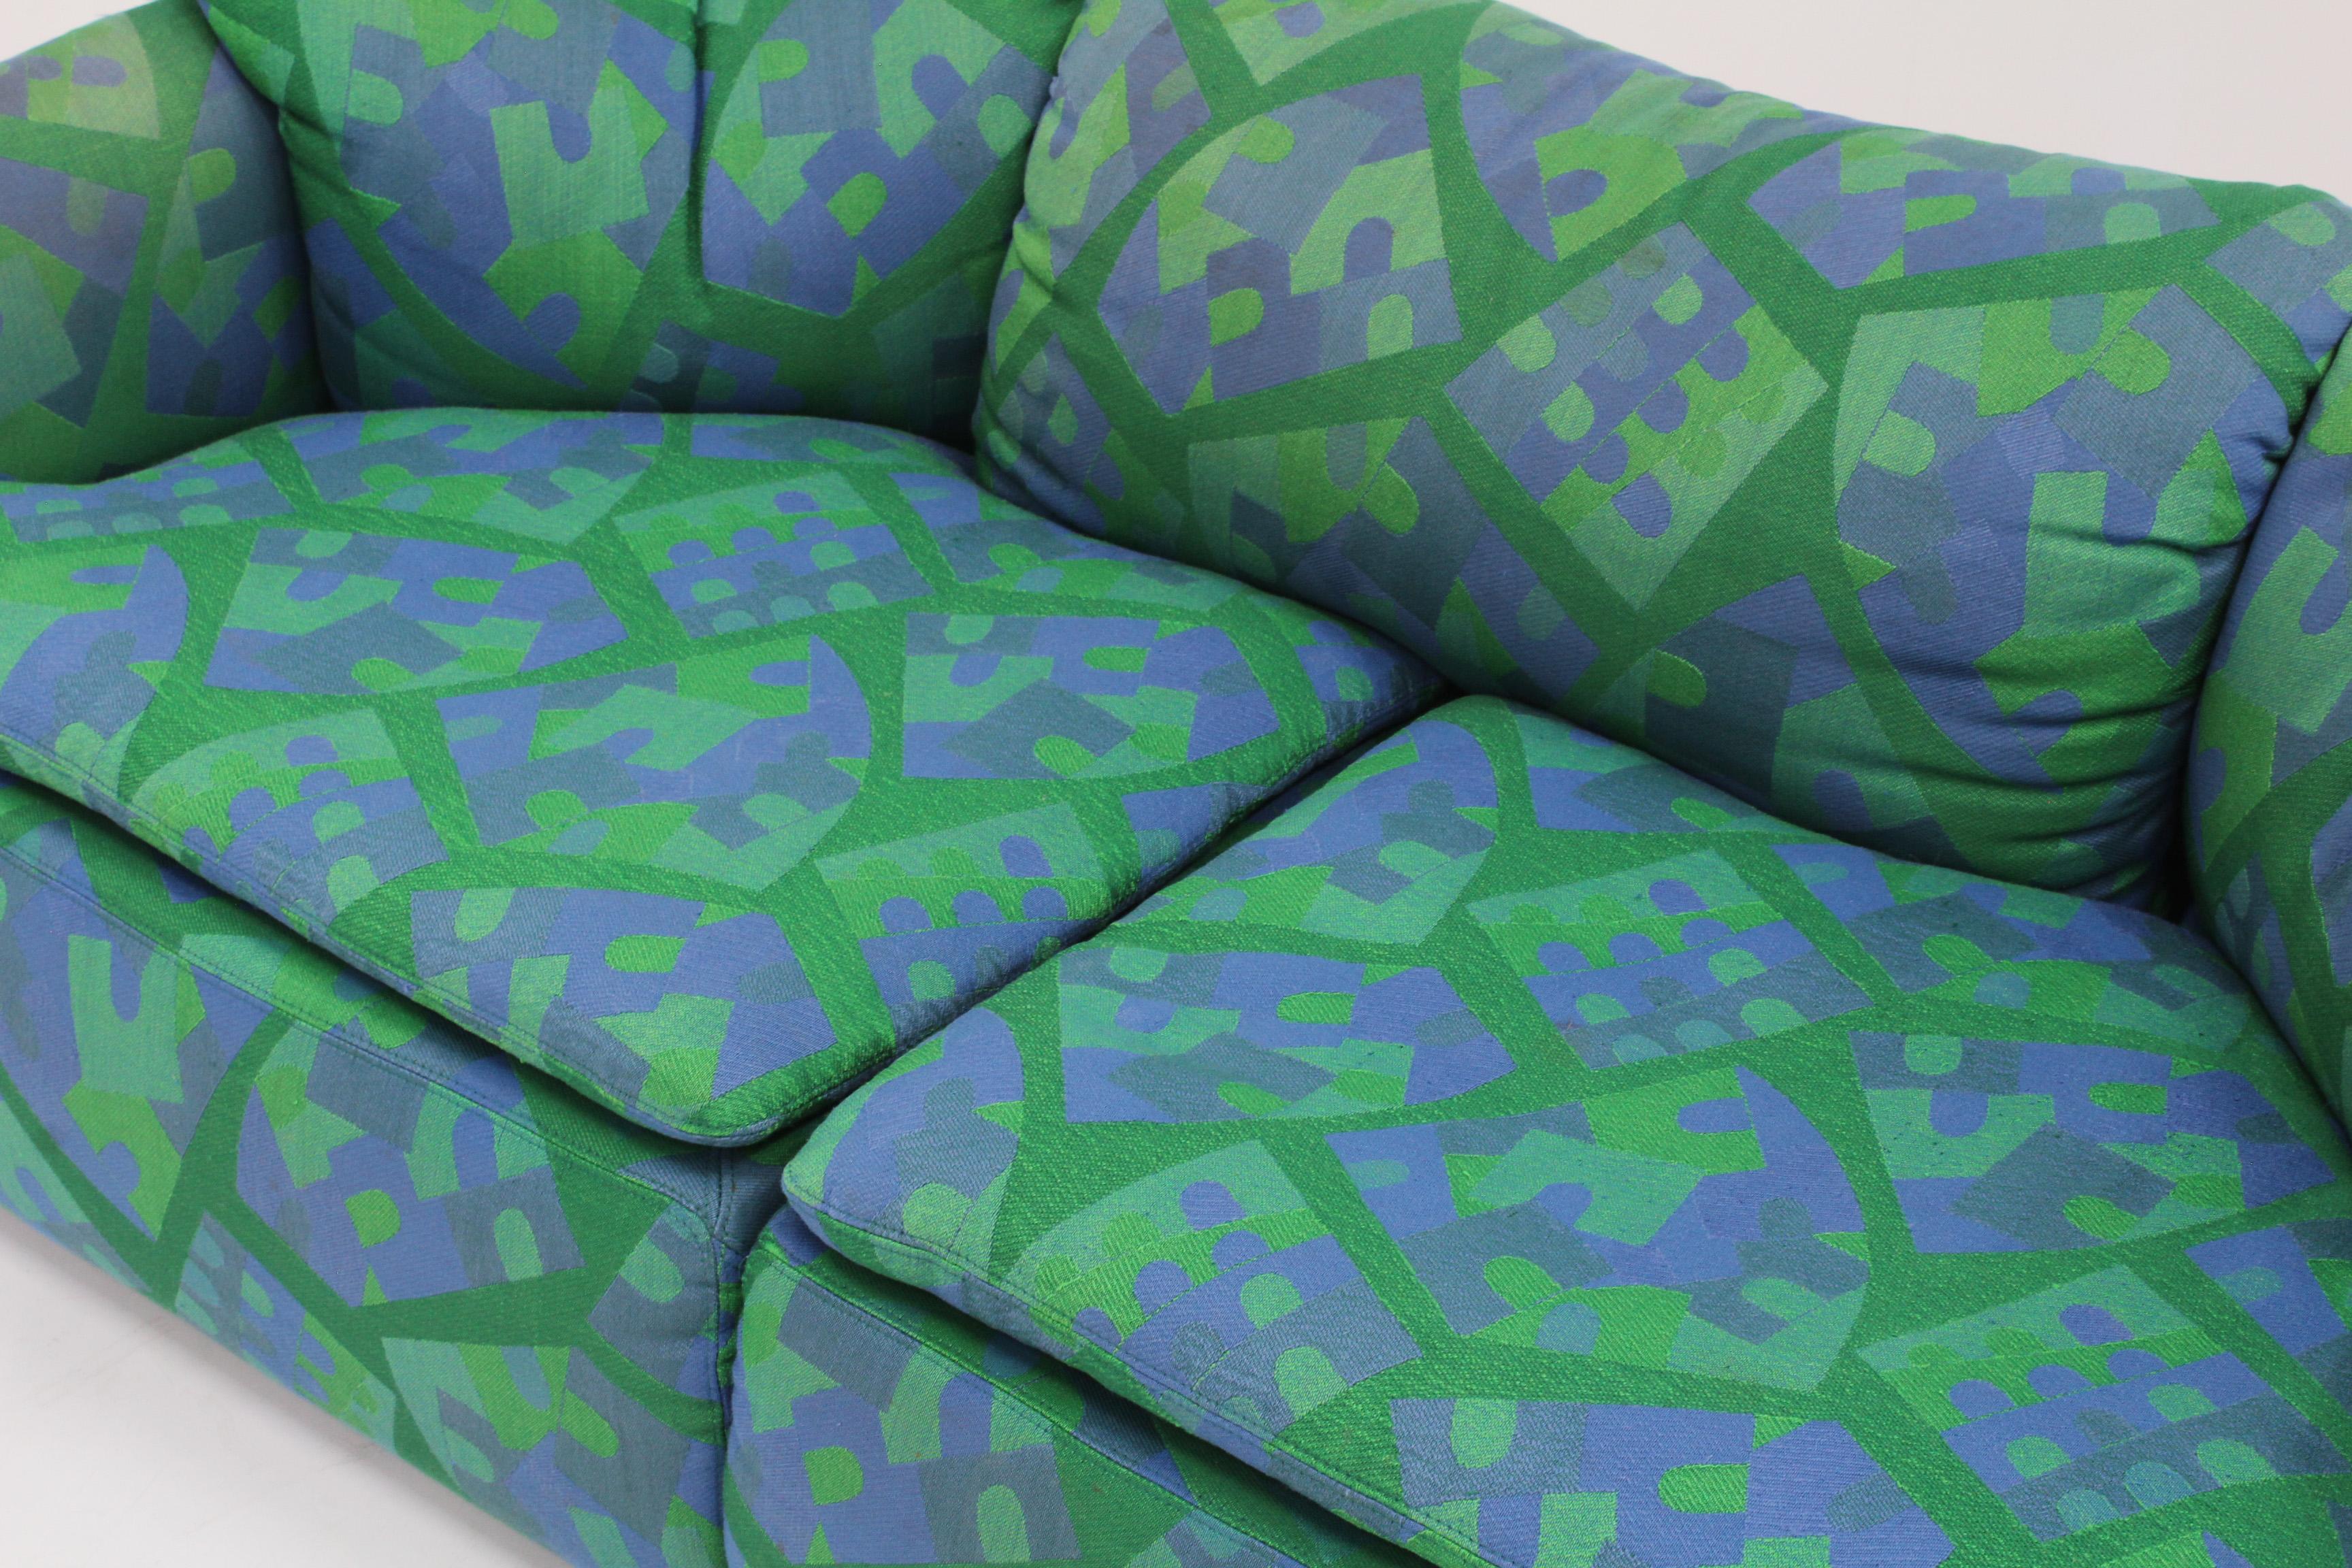 Confidential Sofa by Alberto Rosselli for Saporiti. Design from the 1970s. This Italian sofa has a graphical design with a colourful blue and green fabric.

Good condition with traces of use consistent with age.

Creator: Alberto